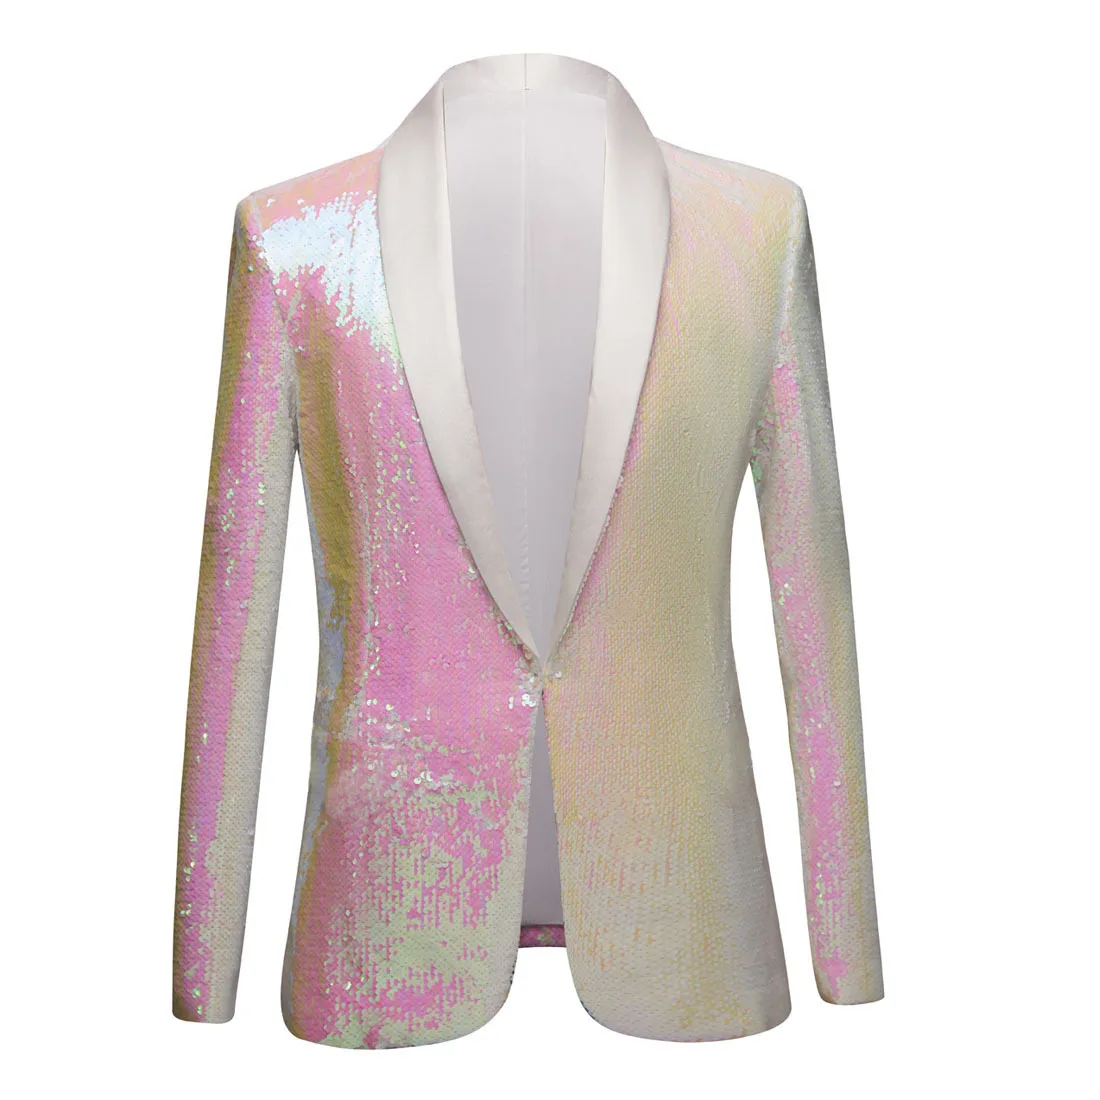 Men Formal Tuxedo Pink White Sequins Pure Blazer Evening Party Celebrate Prom Host Singer Stage Performance Suit Jacket Costume